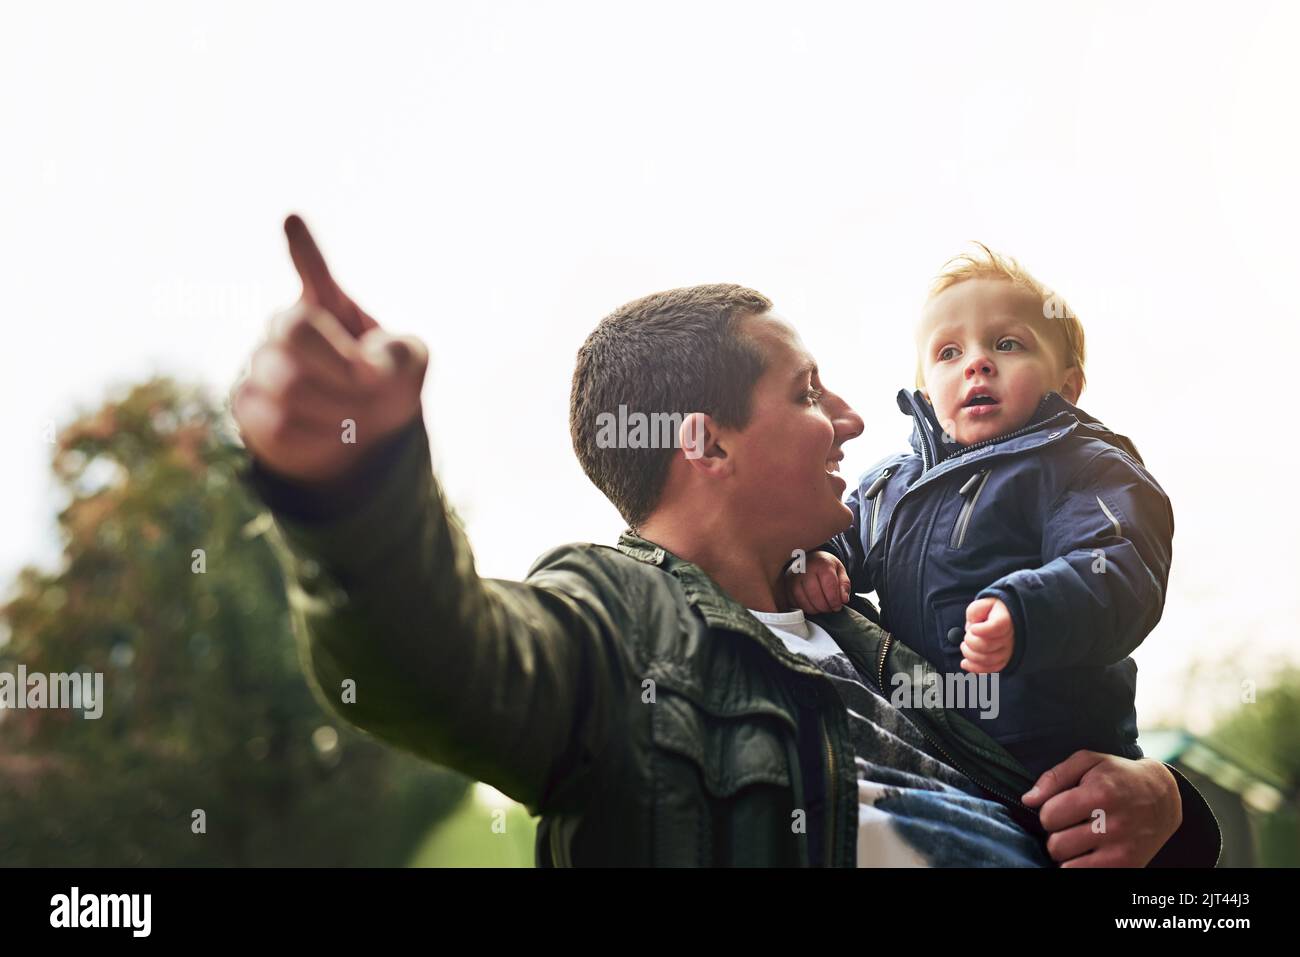 Theyre off to make some memories. a father bonding with his son outside. Stock Photo